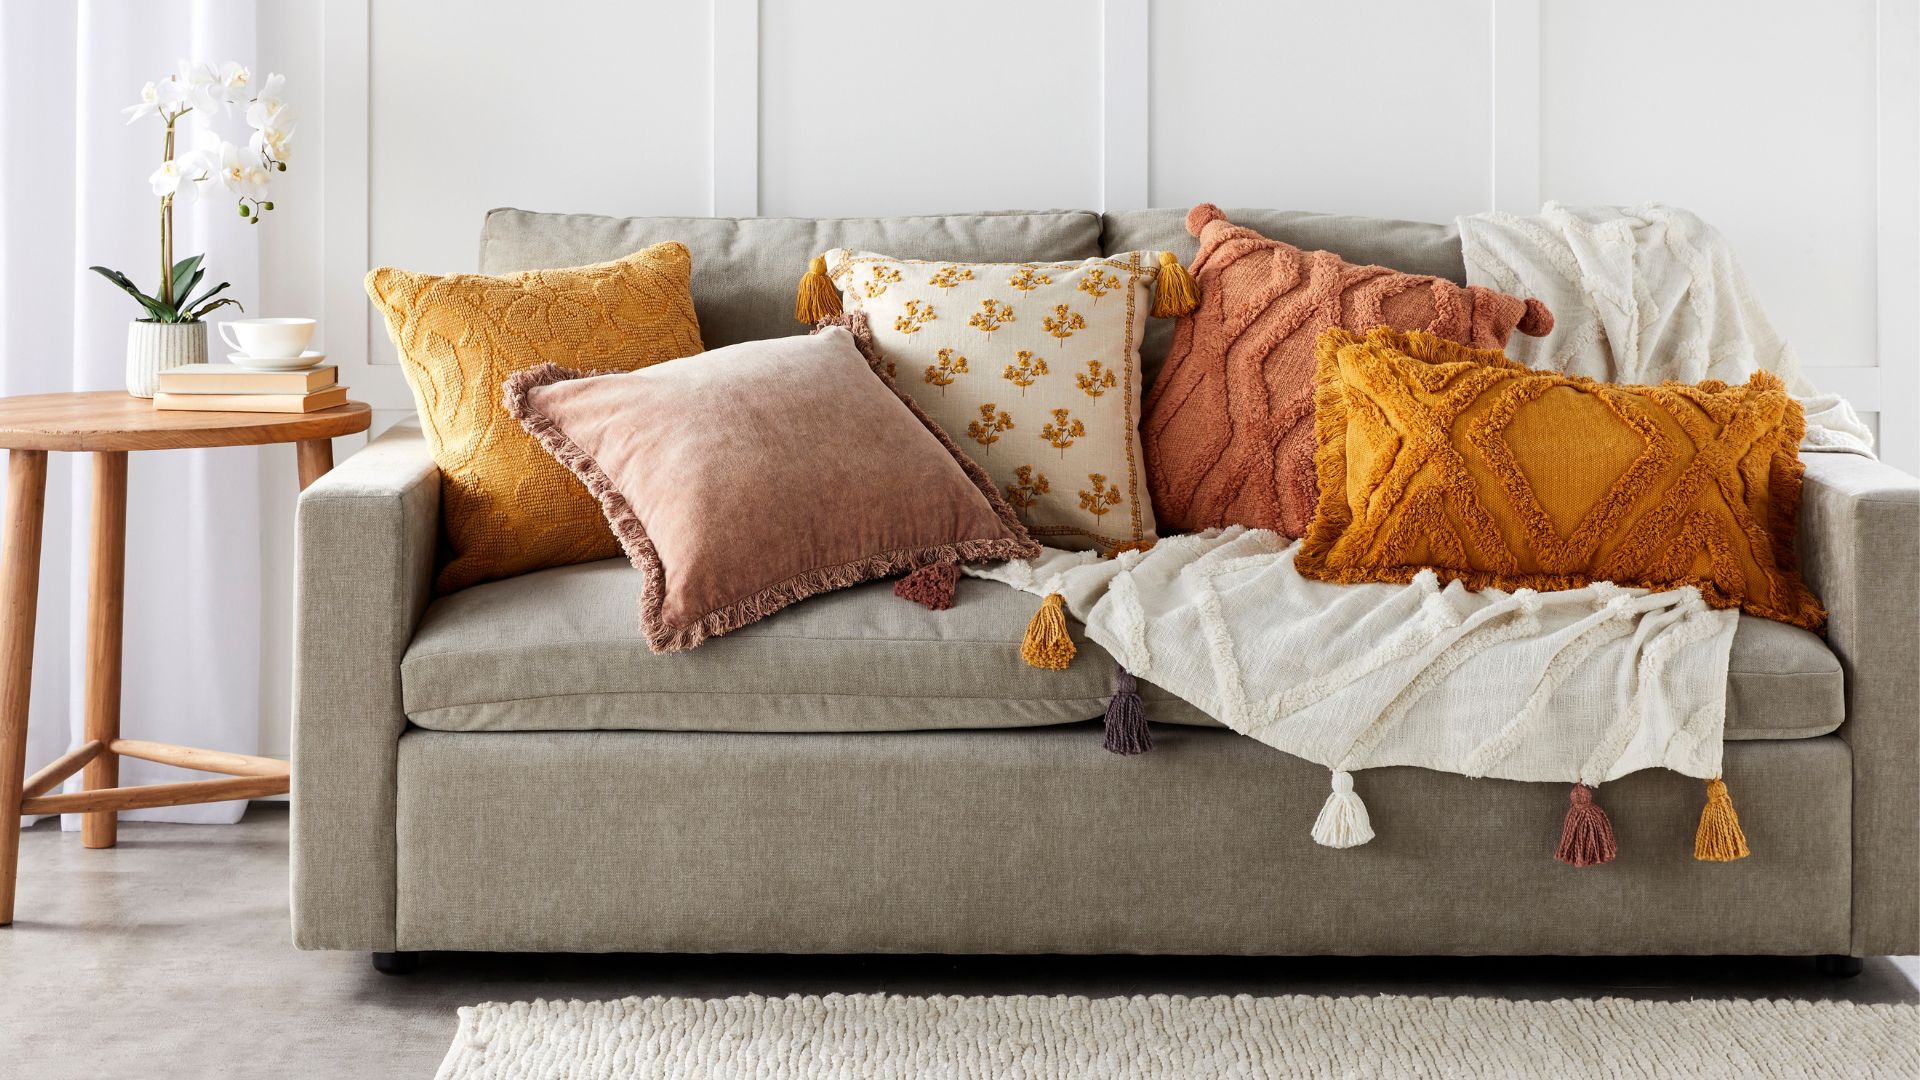 Cushion Styling 101: How To Arrange Cushions On A Couch